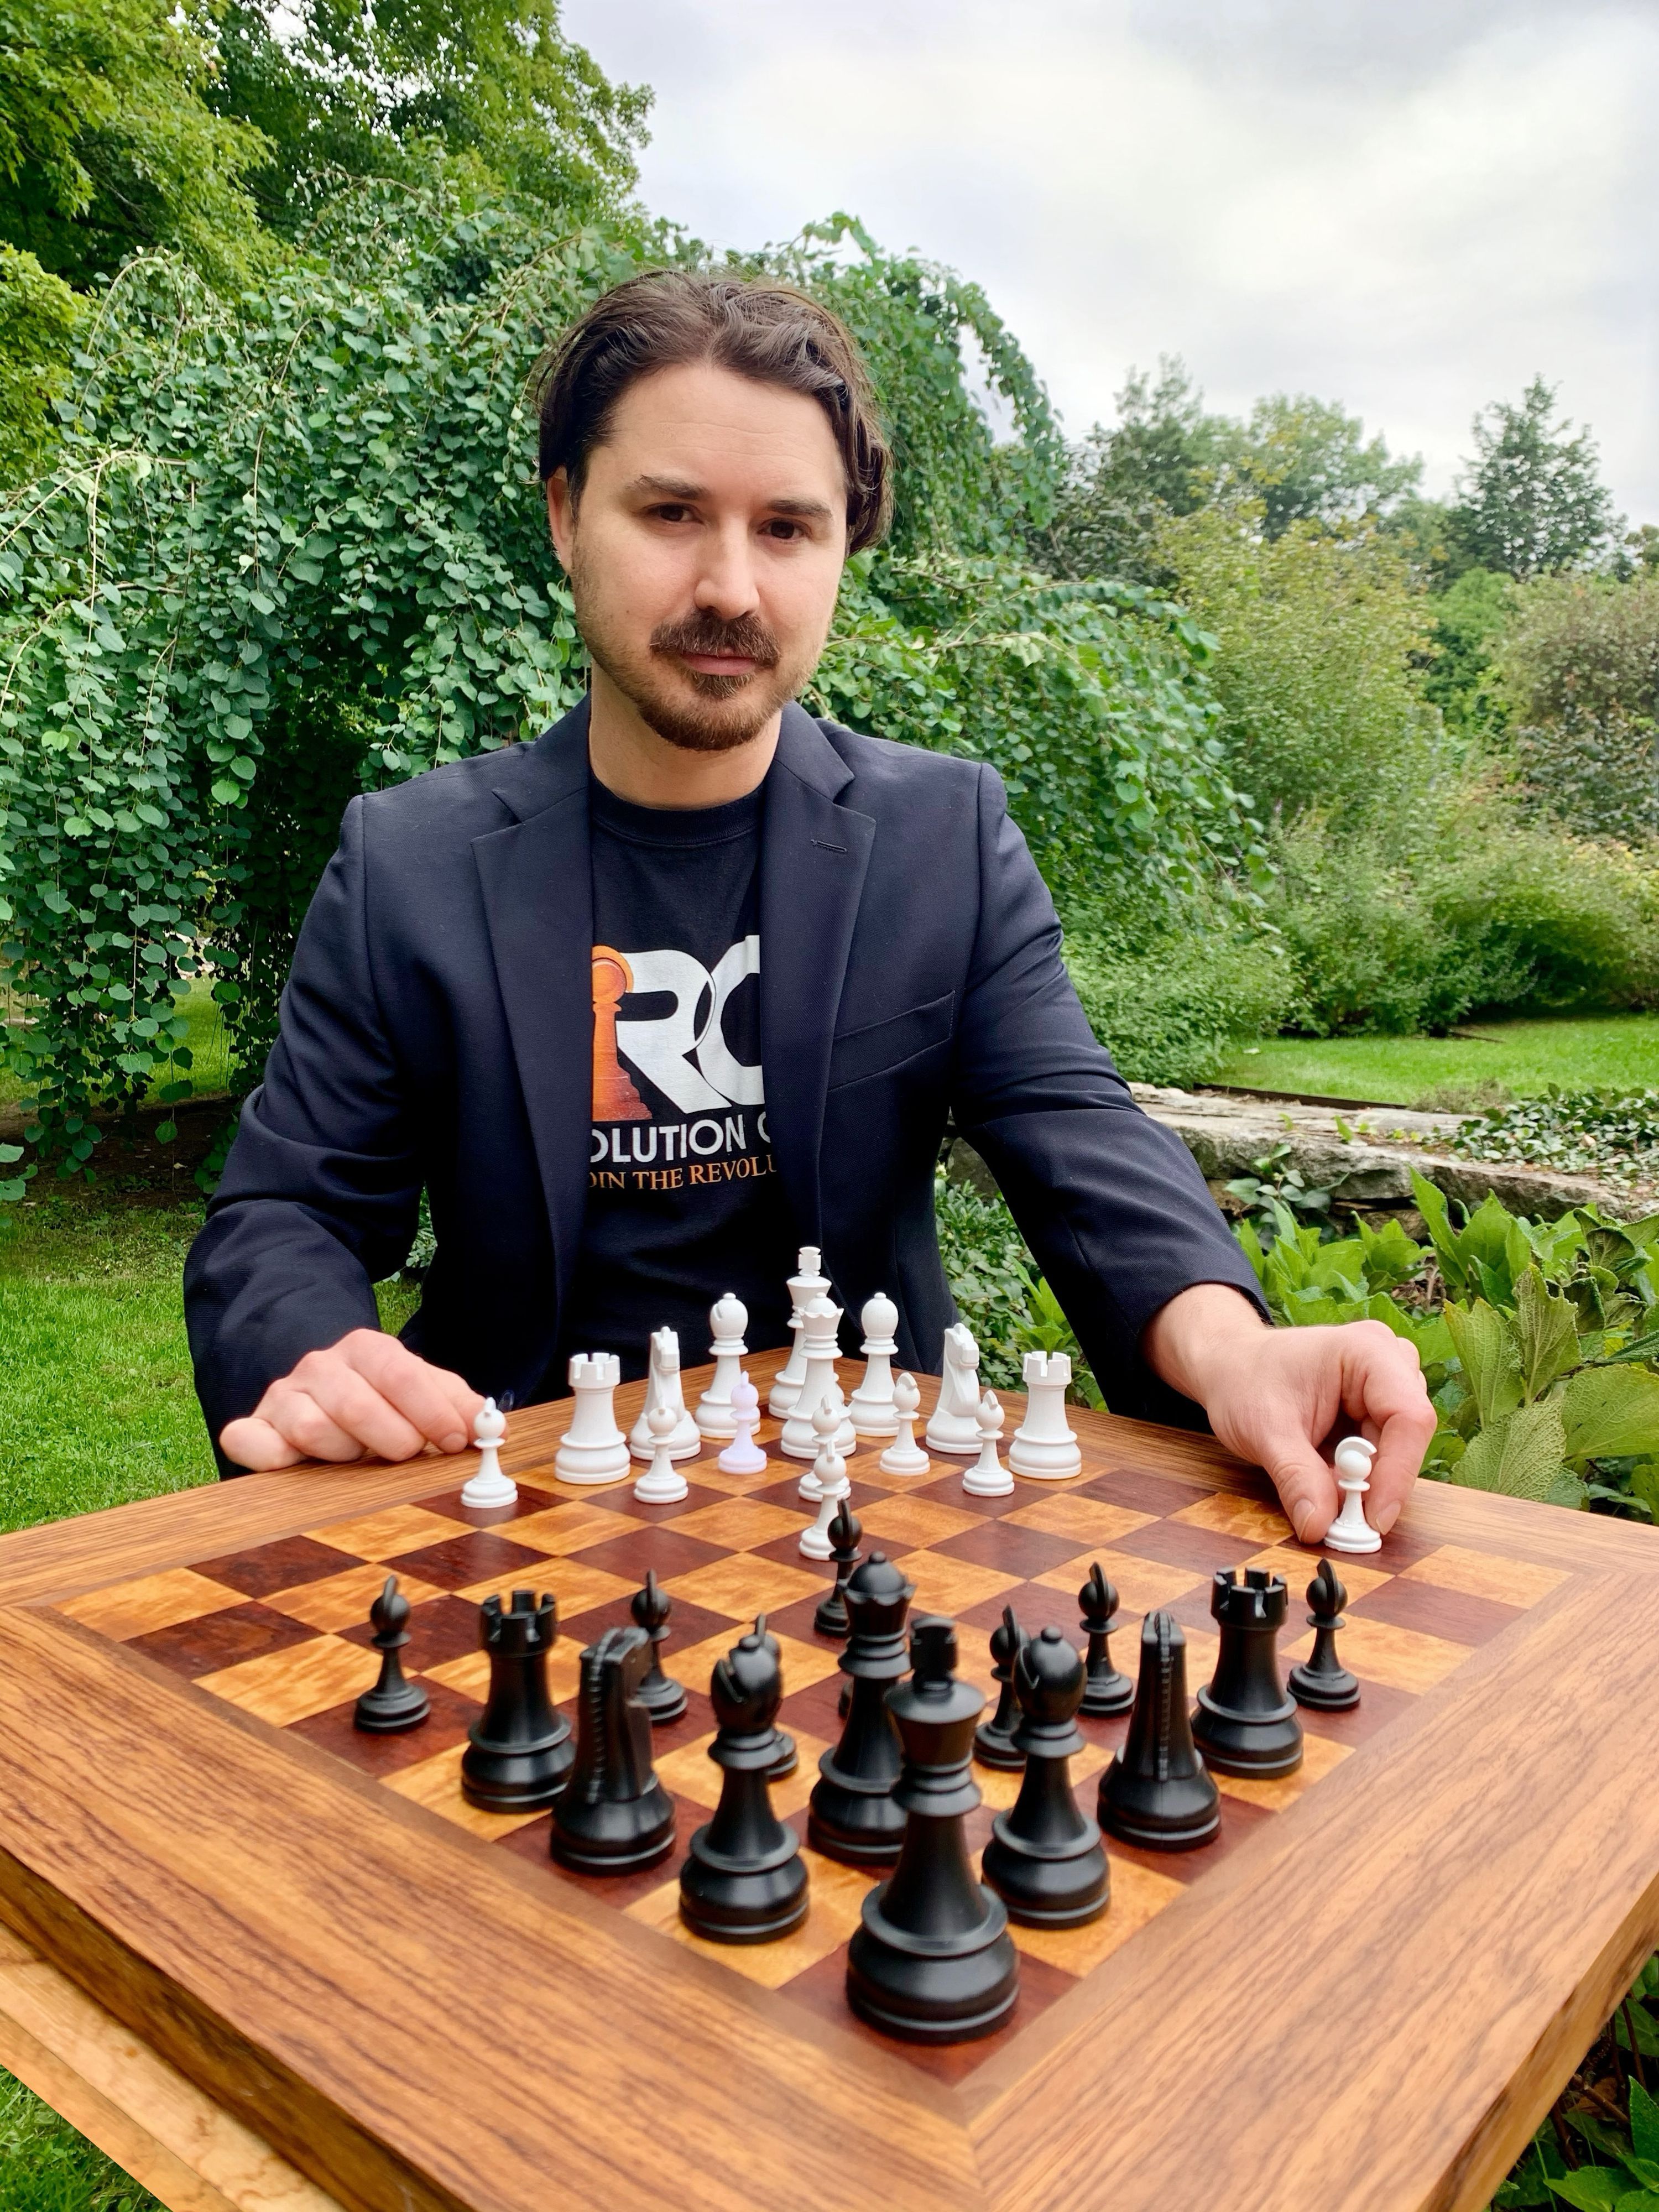 Home  Chasing Checkmate Chess Academy